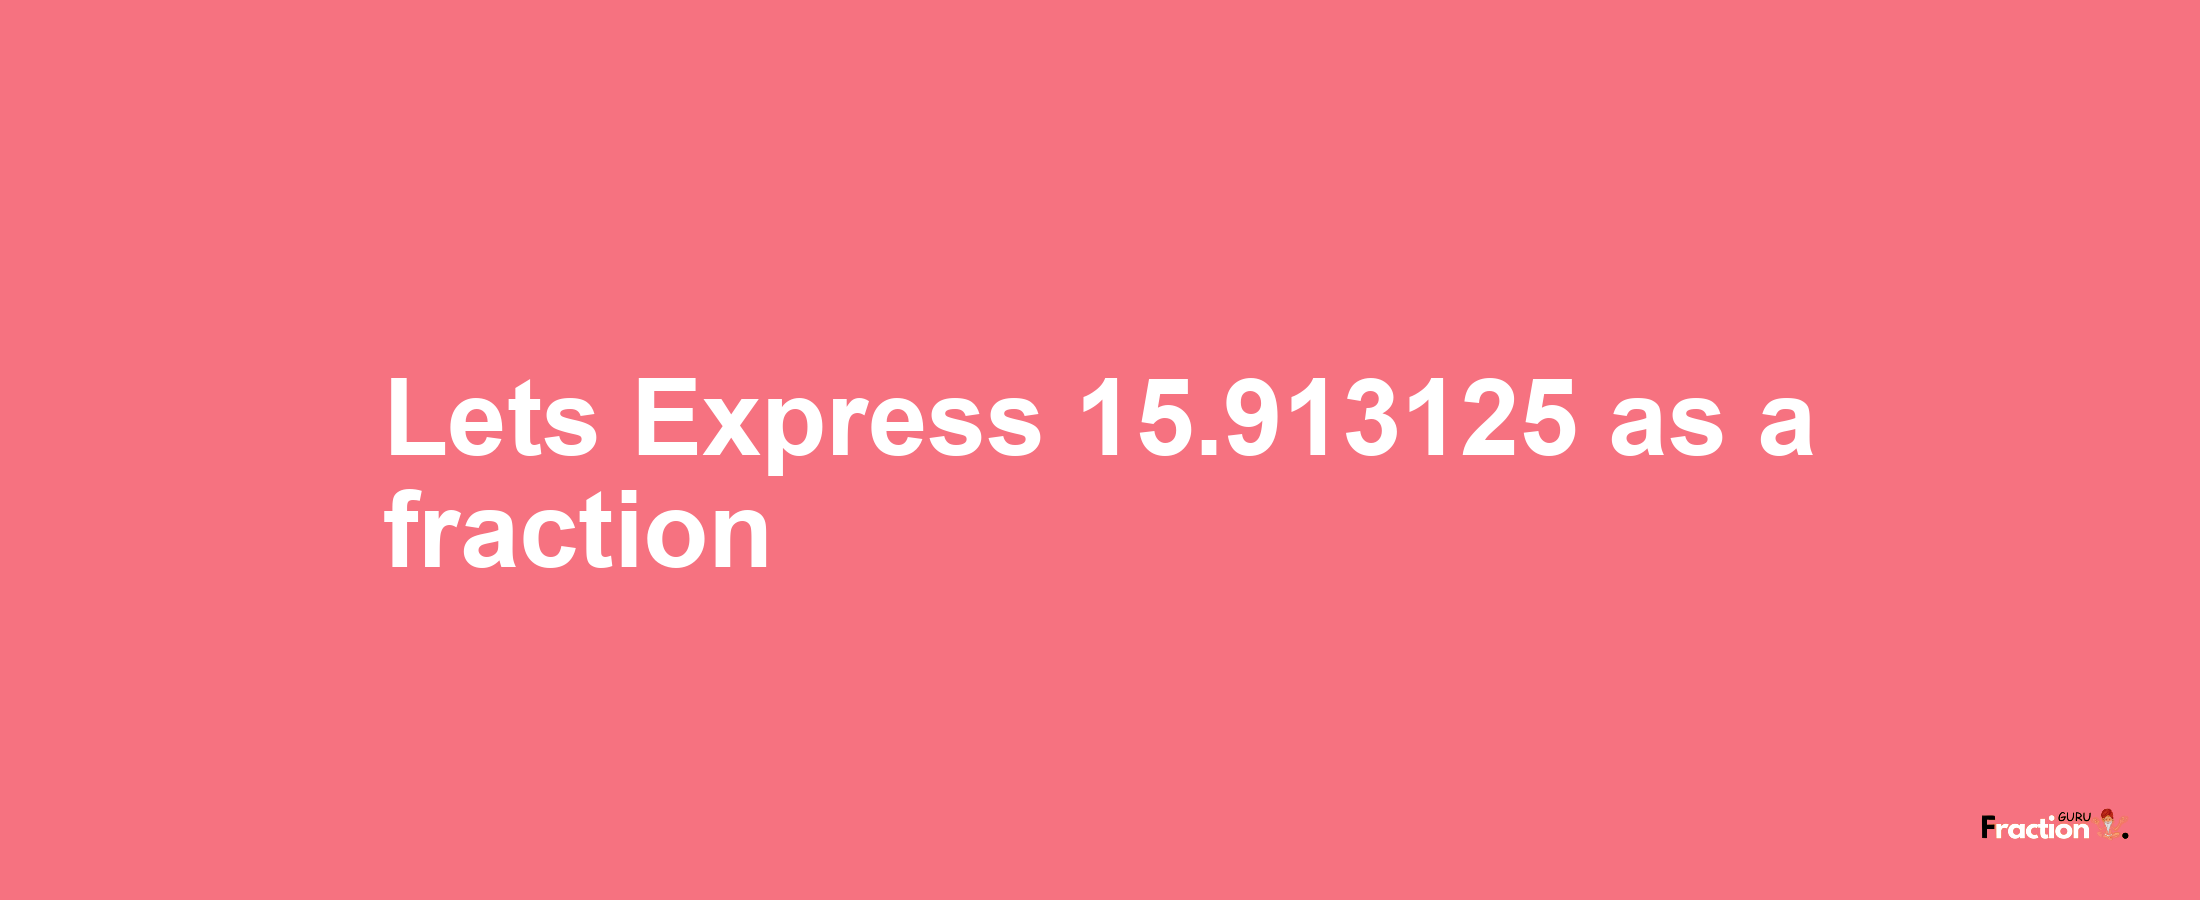 Lets Express 15.913125 as afraction